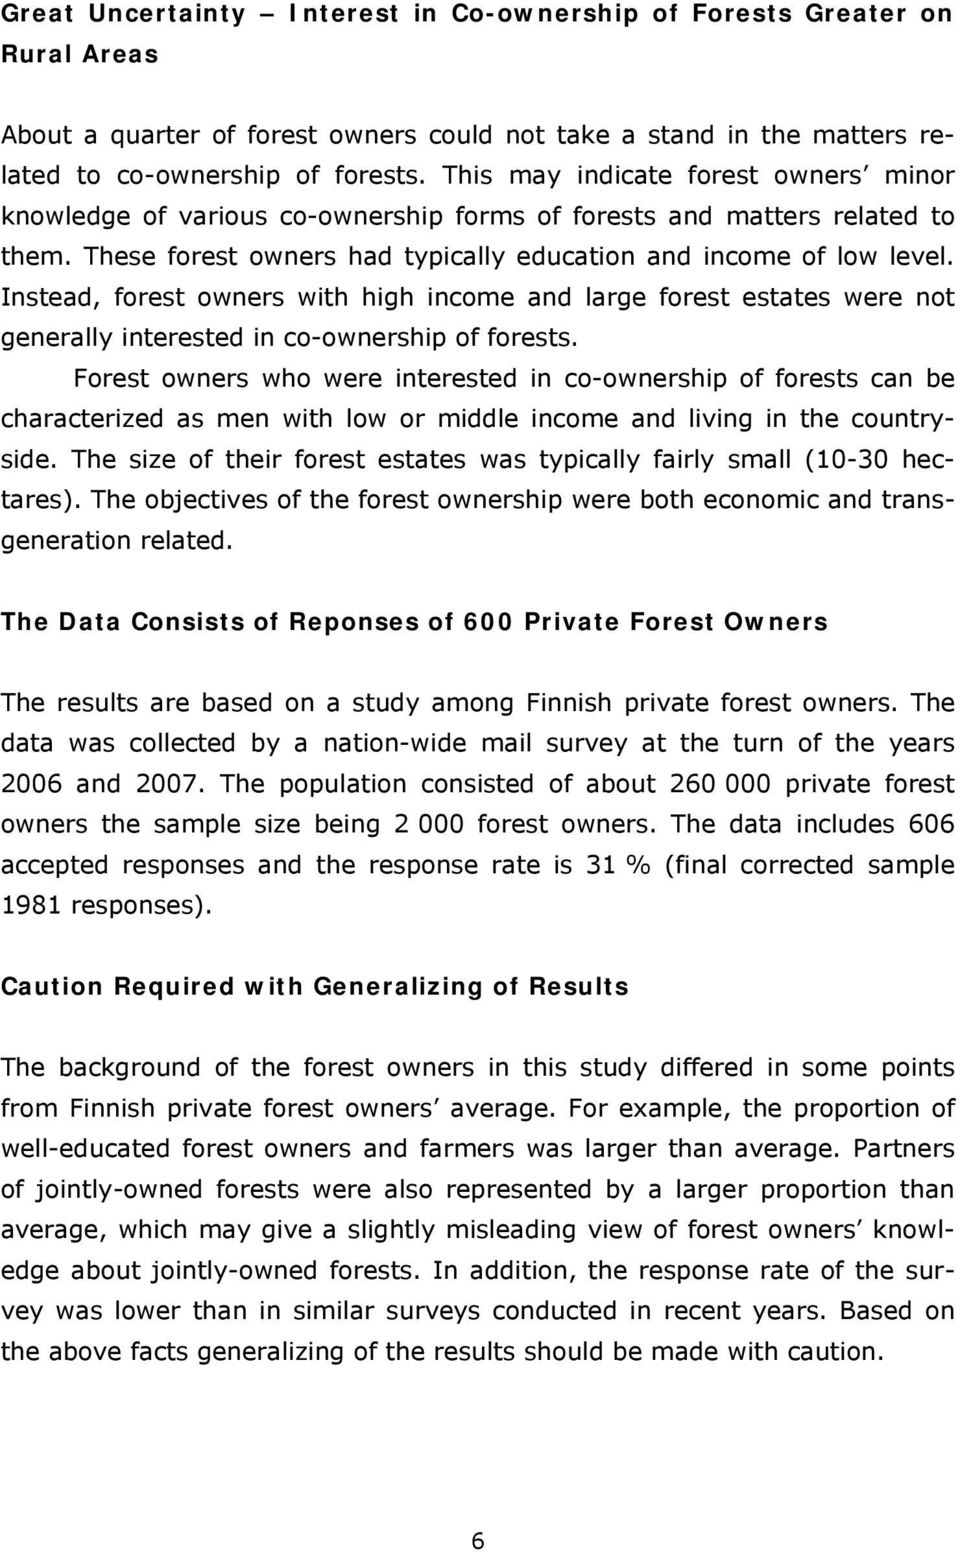 Instead, forest owners with high income and large forest estates were not generally interested in co-ownership of forests.